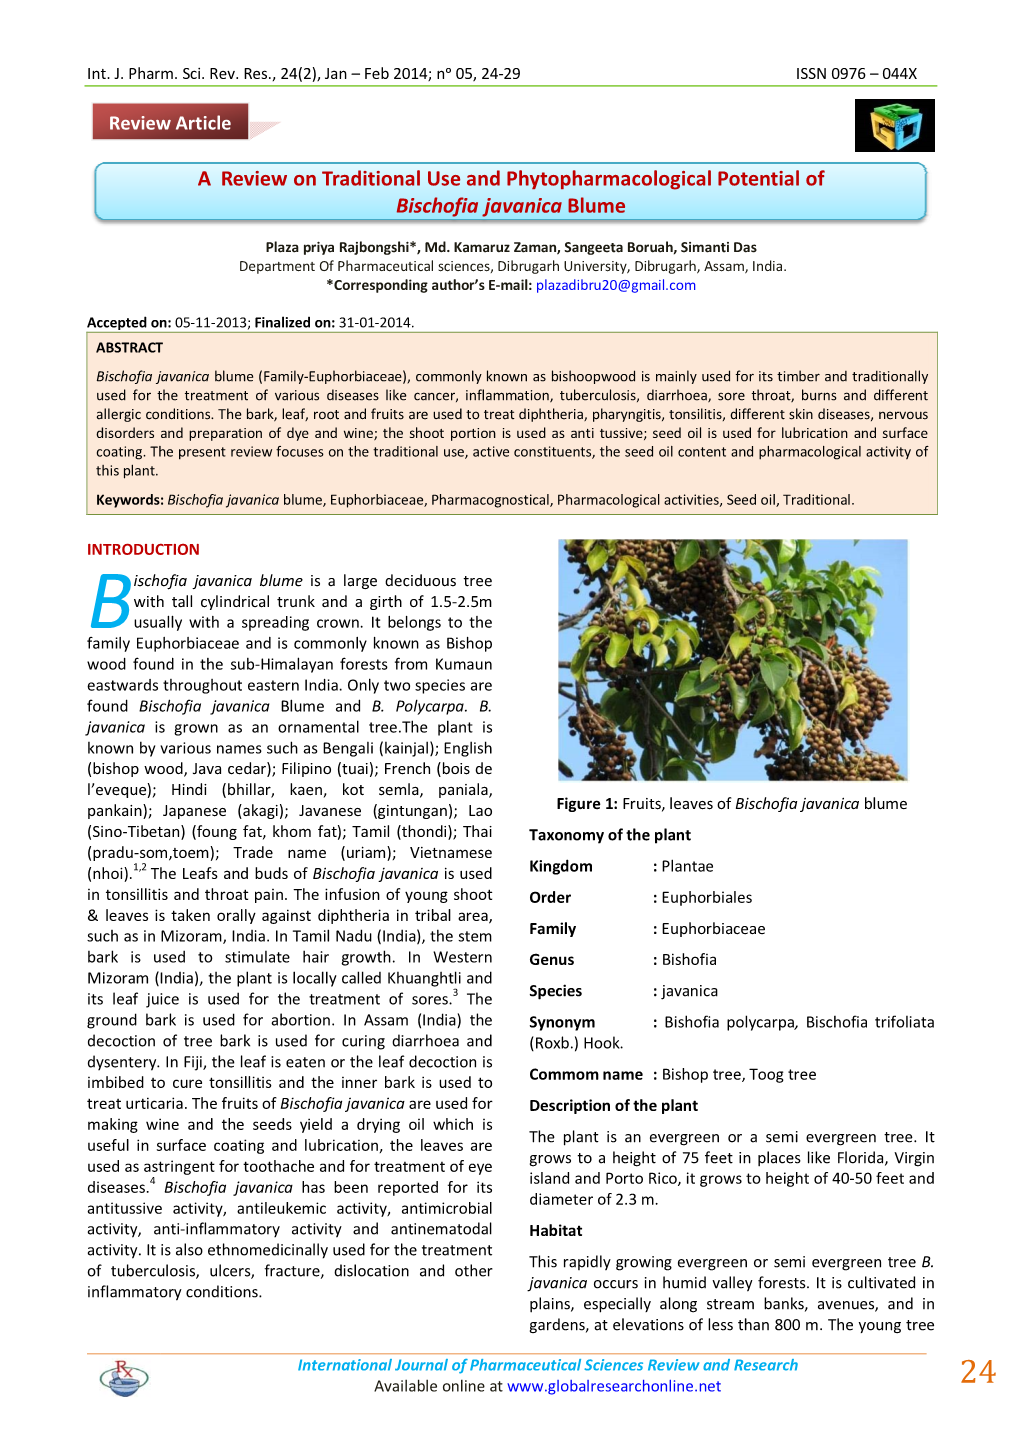 A Review on Traditional Use and Phytopharmacological Potential of Bischofia Javanica Blume